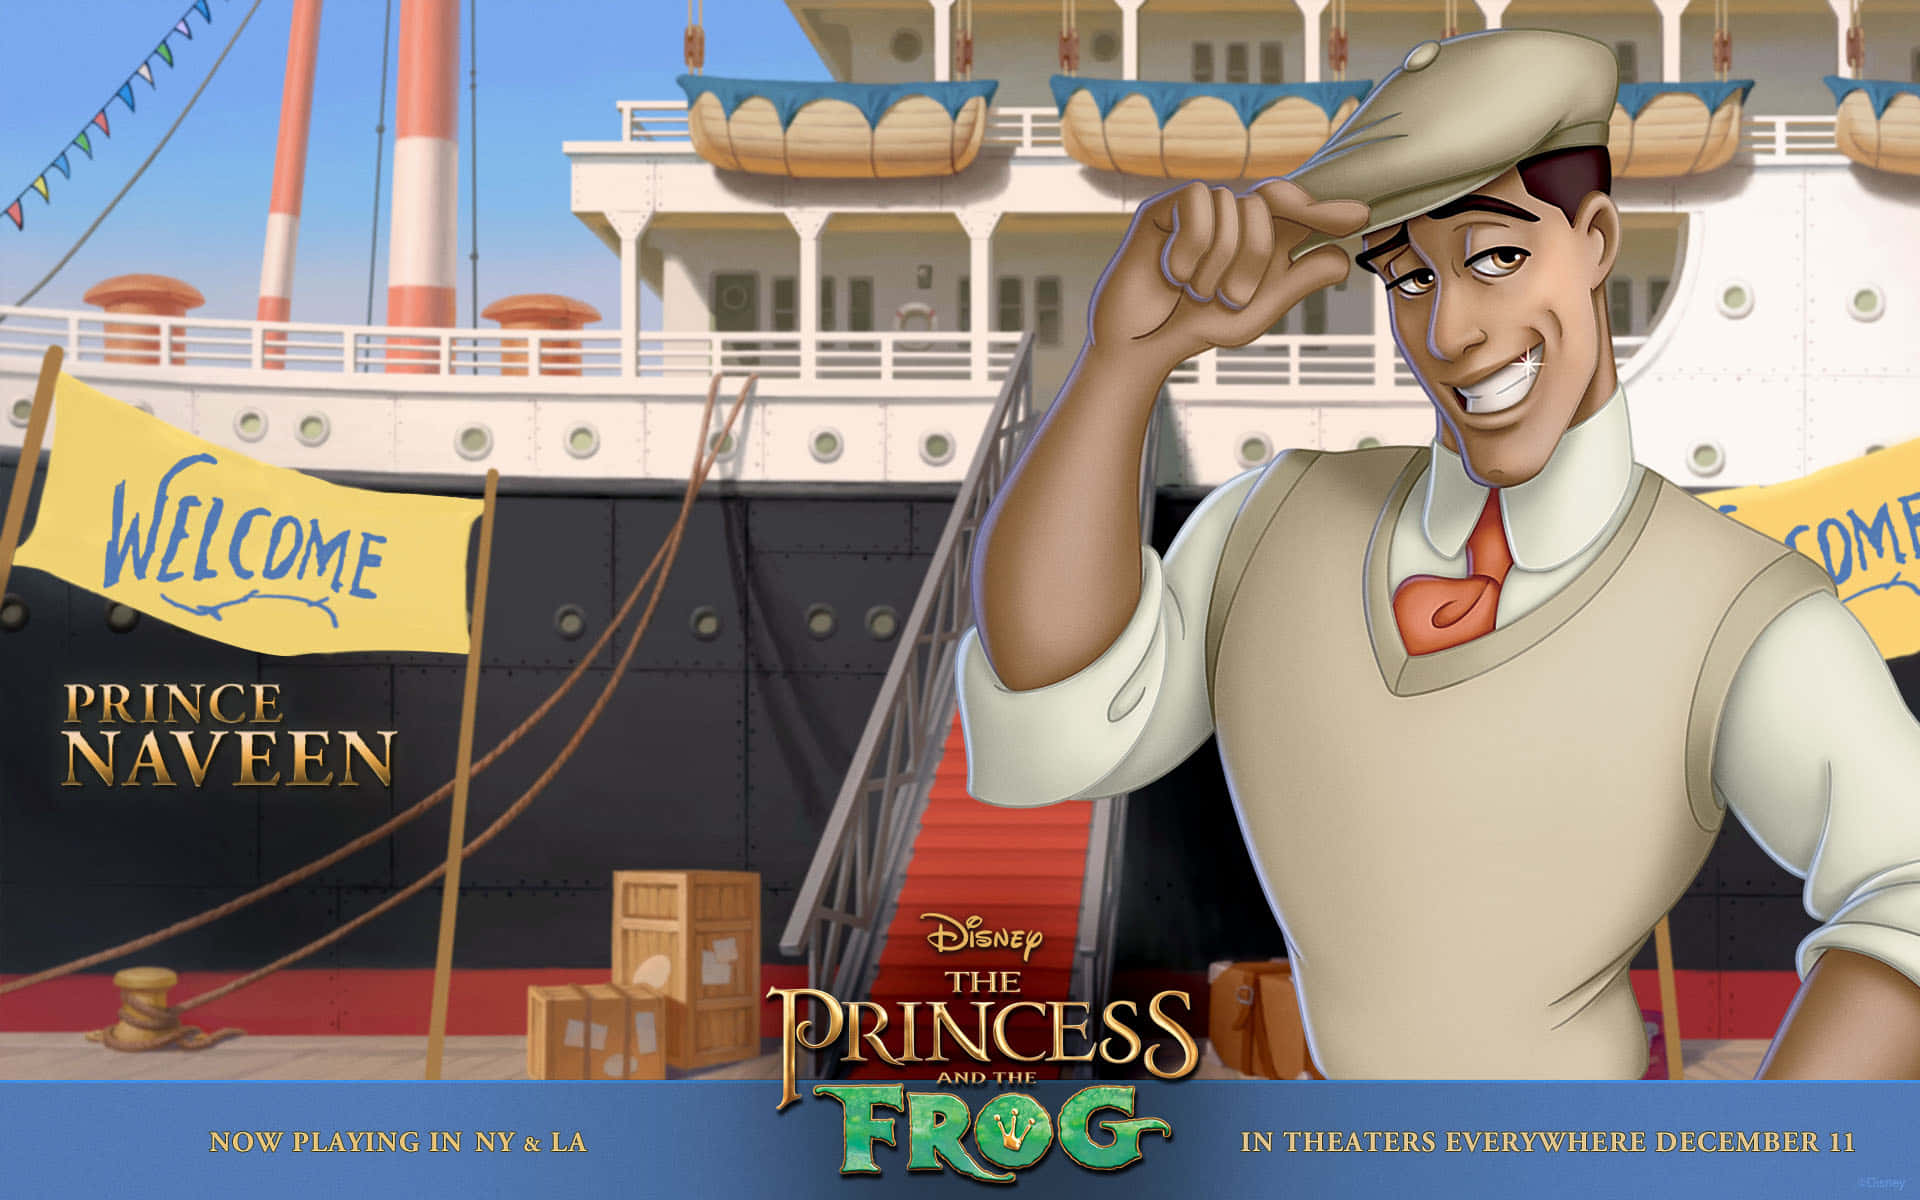 "The Classic Princess and -The Frog Story"